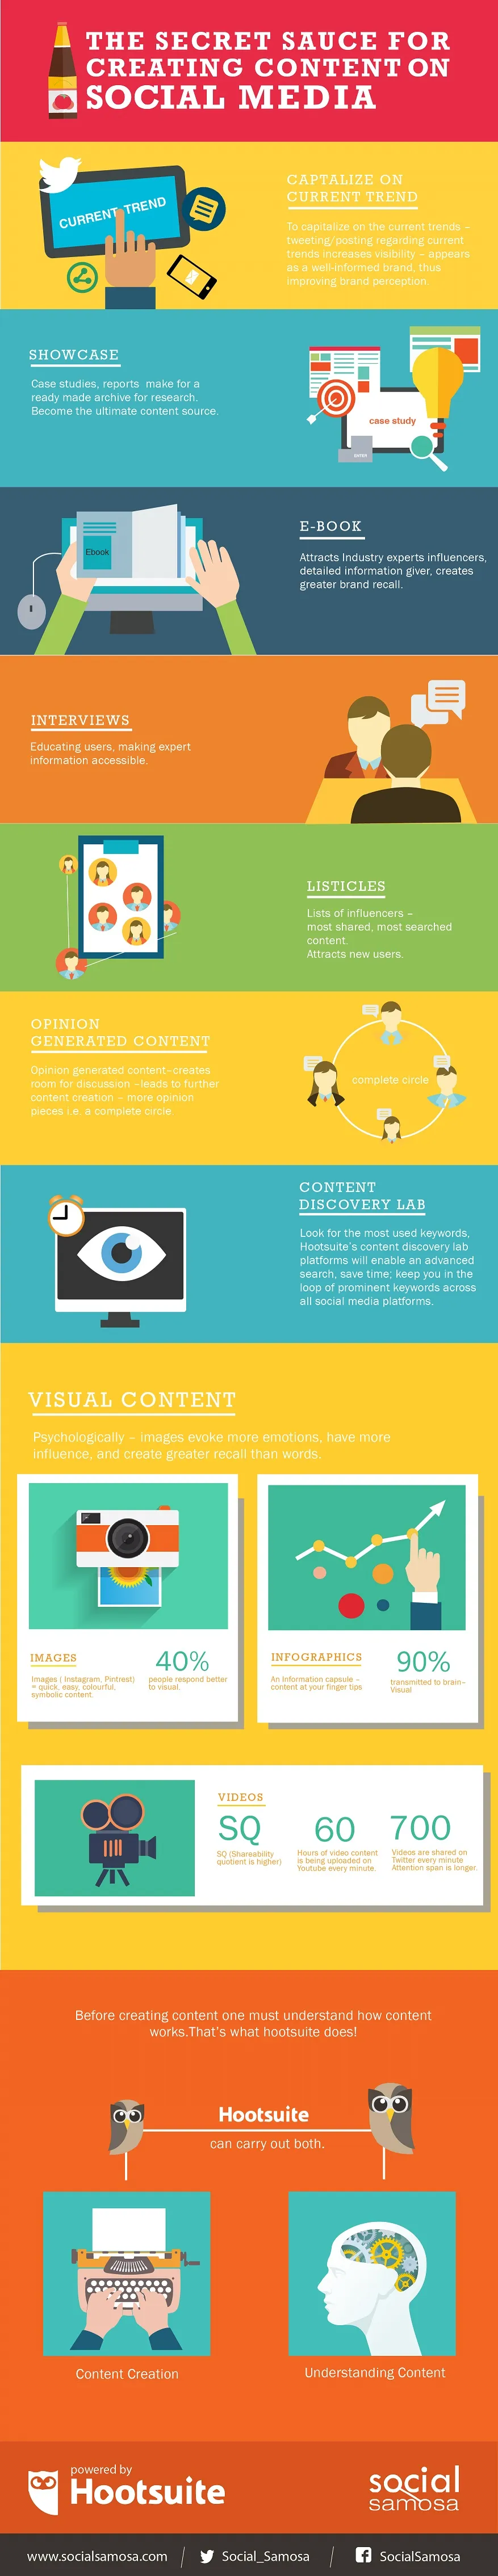 infographic 4 hootsuite_2